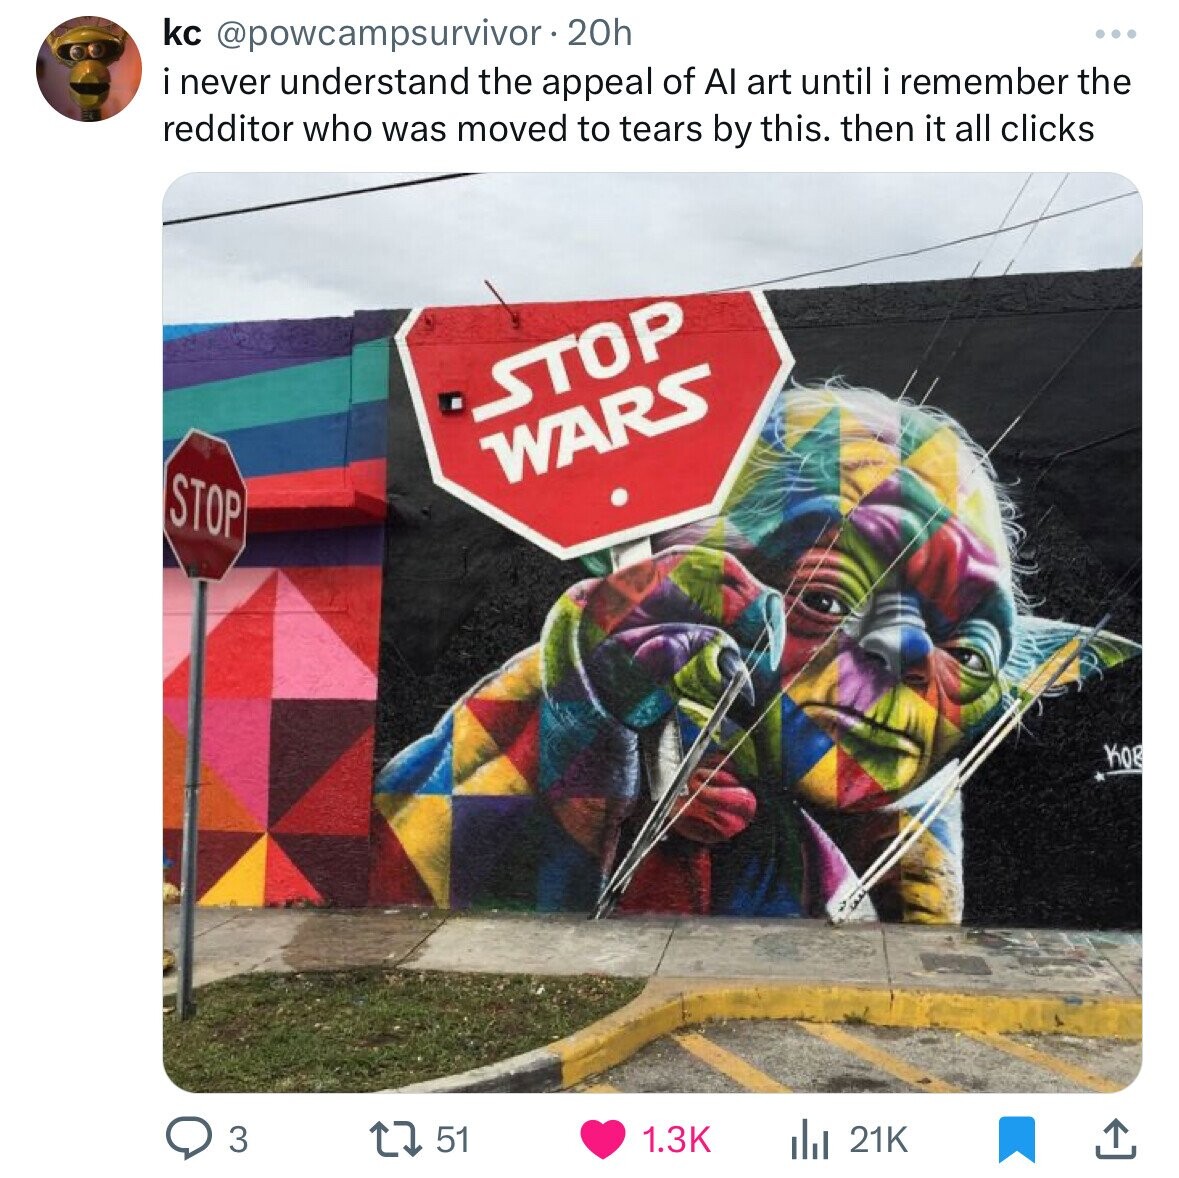 wynwood walls - kc 20h i never understand the appeal of Al art until i remember the redditor who was moved to tears by this. then it all clicks Stop 3 Stop Wars t51 21K Kor